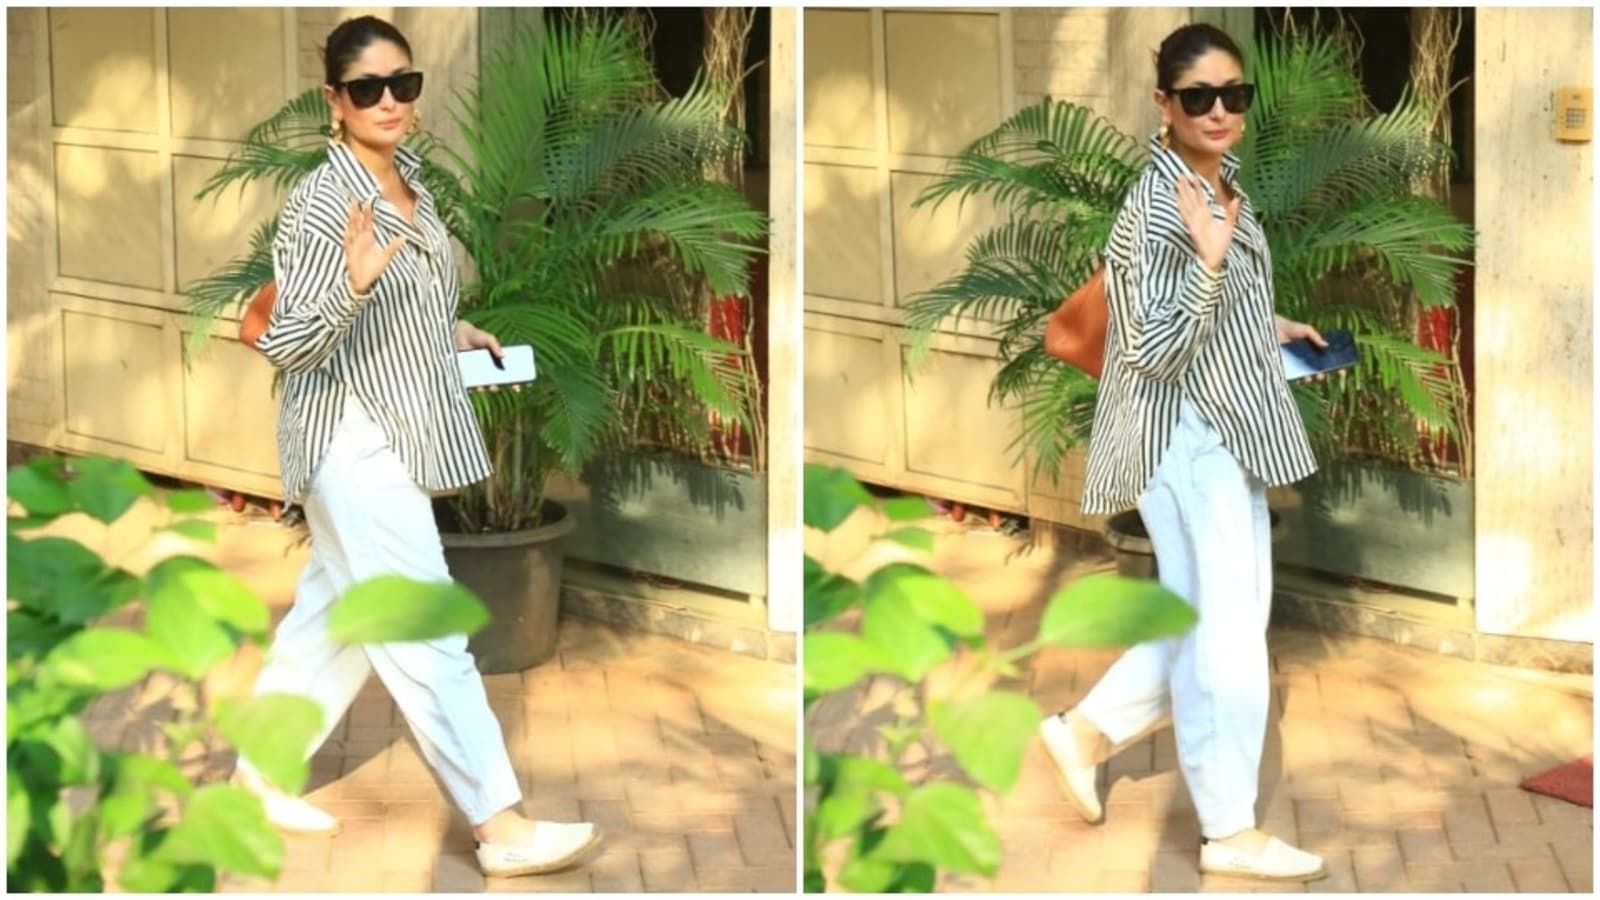 Kareena Kapoor Khan elevates everyday lazy dressing with striped shirt, baggy pants and cool accessories. We love it